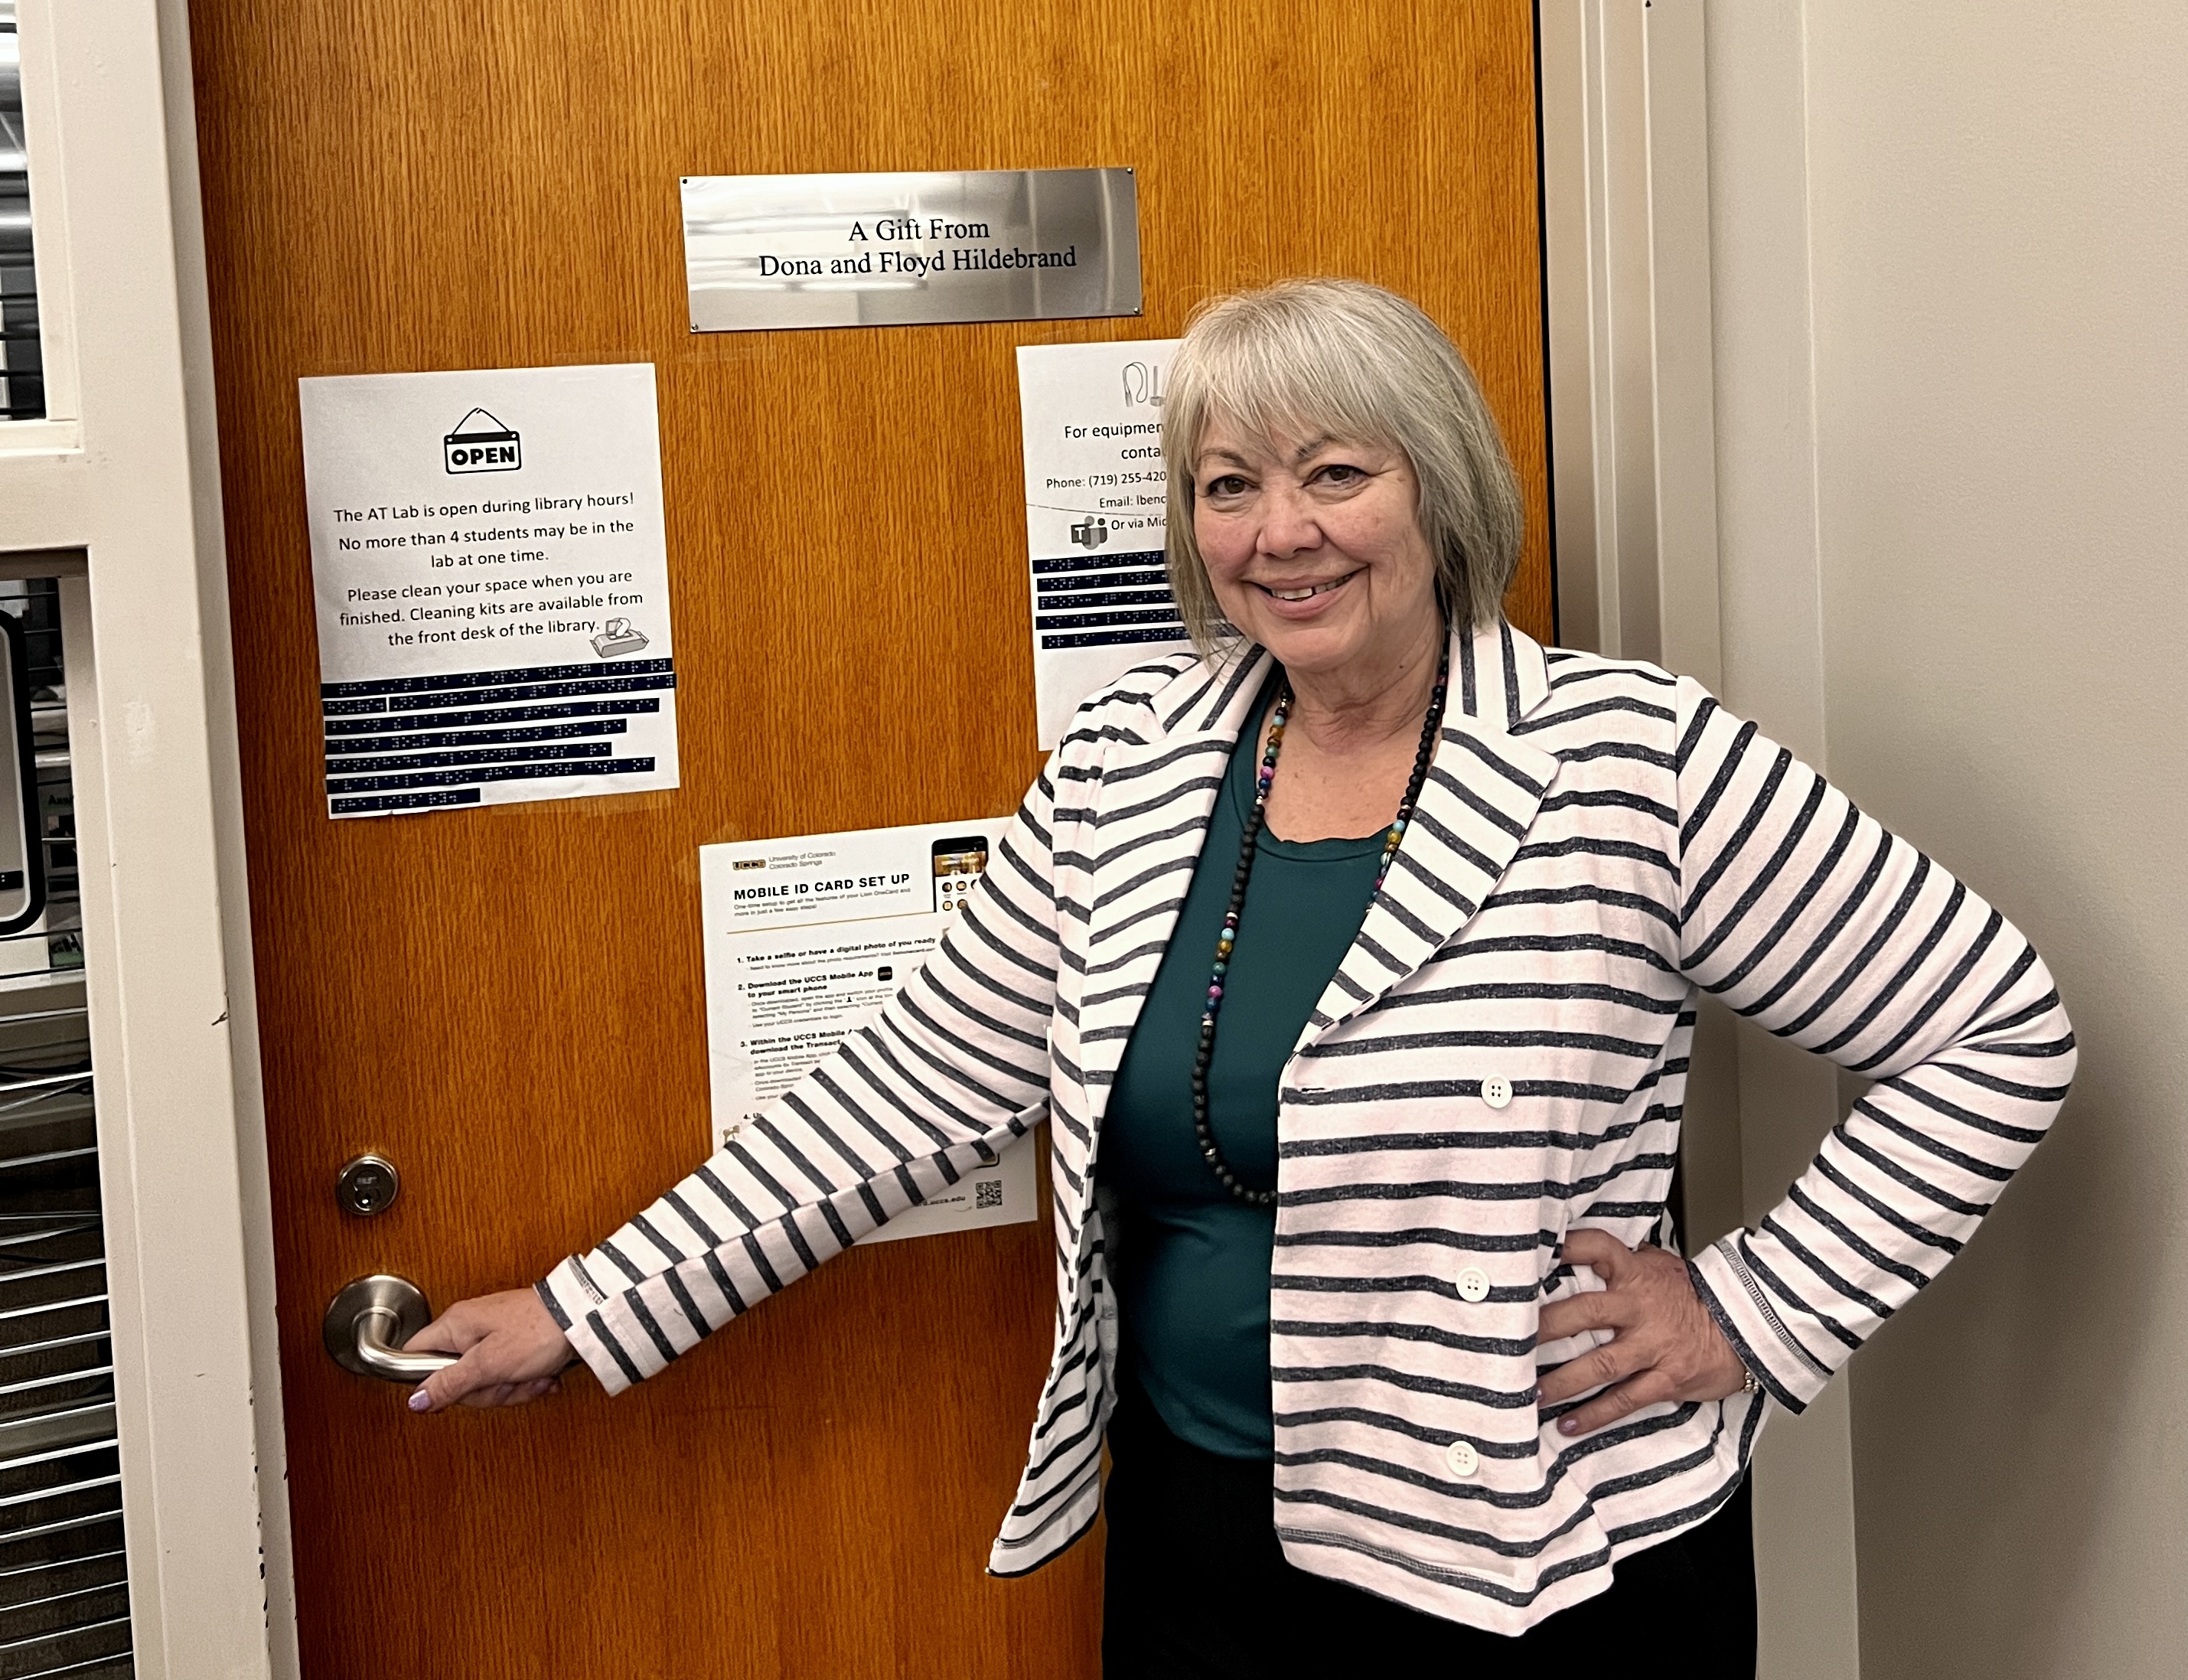 Assistive Technology Specialist Leyna Bencomo standing in front of the door to the Assistive Technology Lab